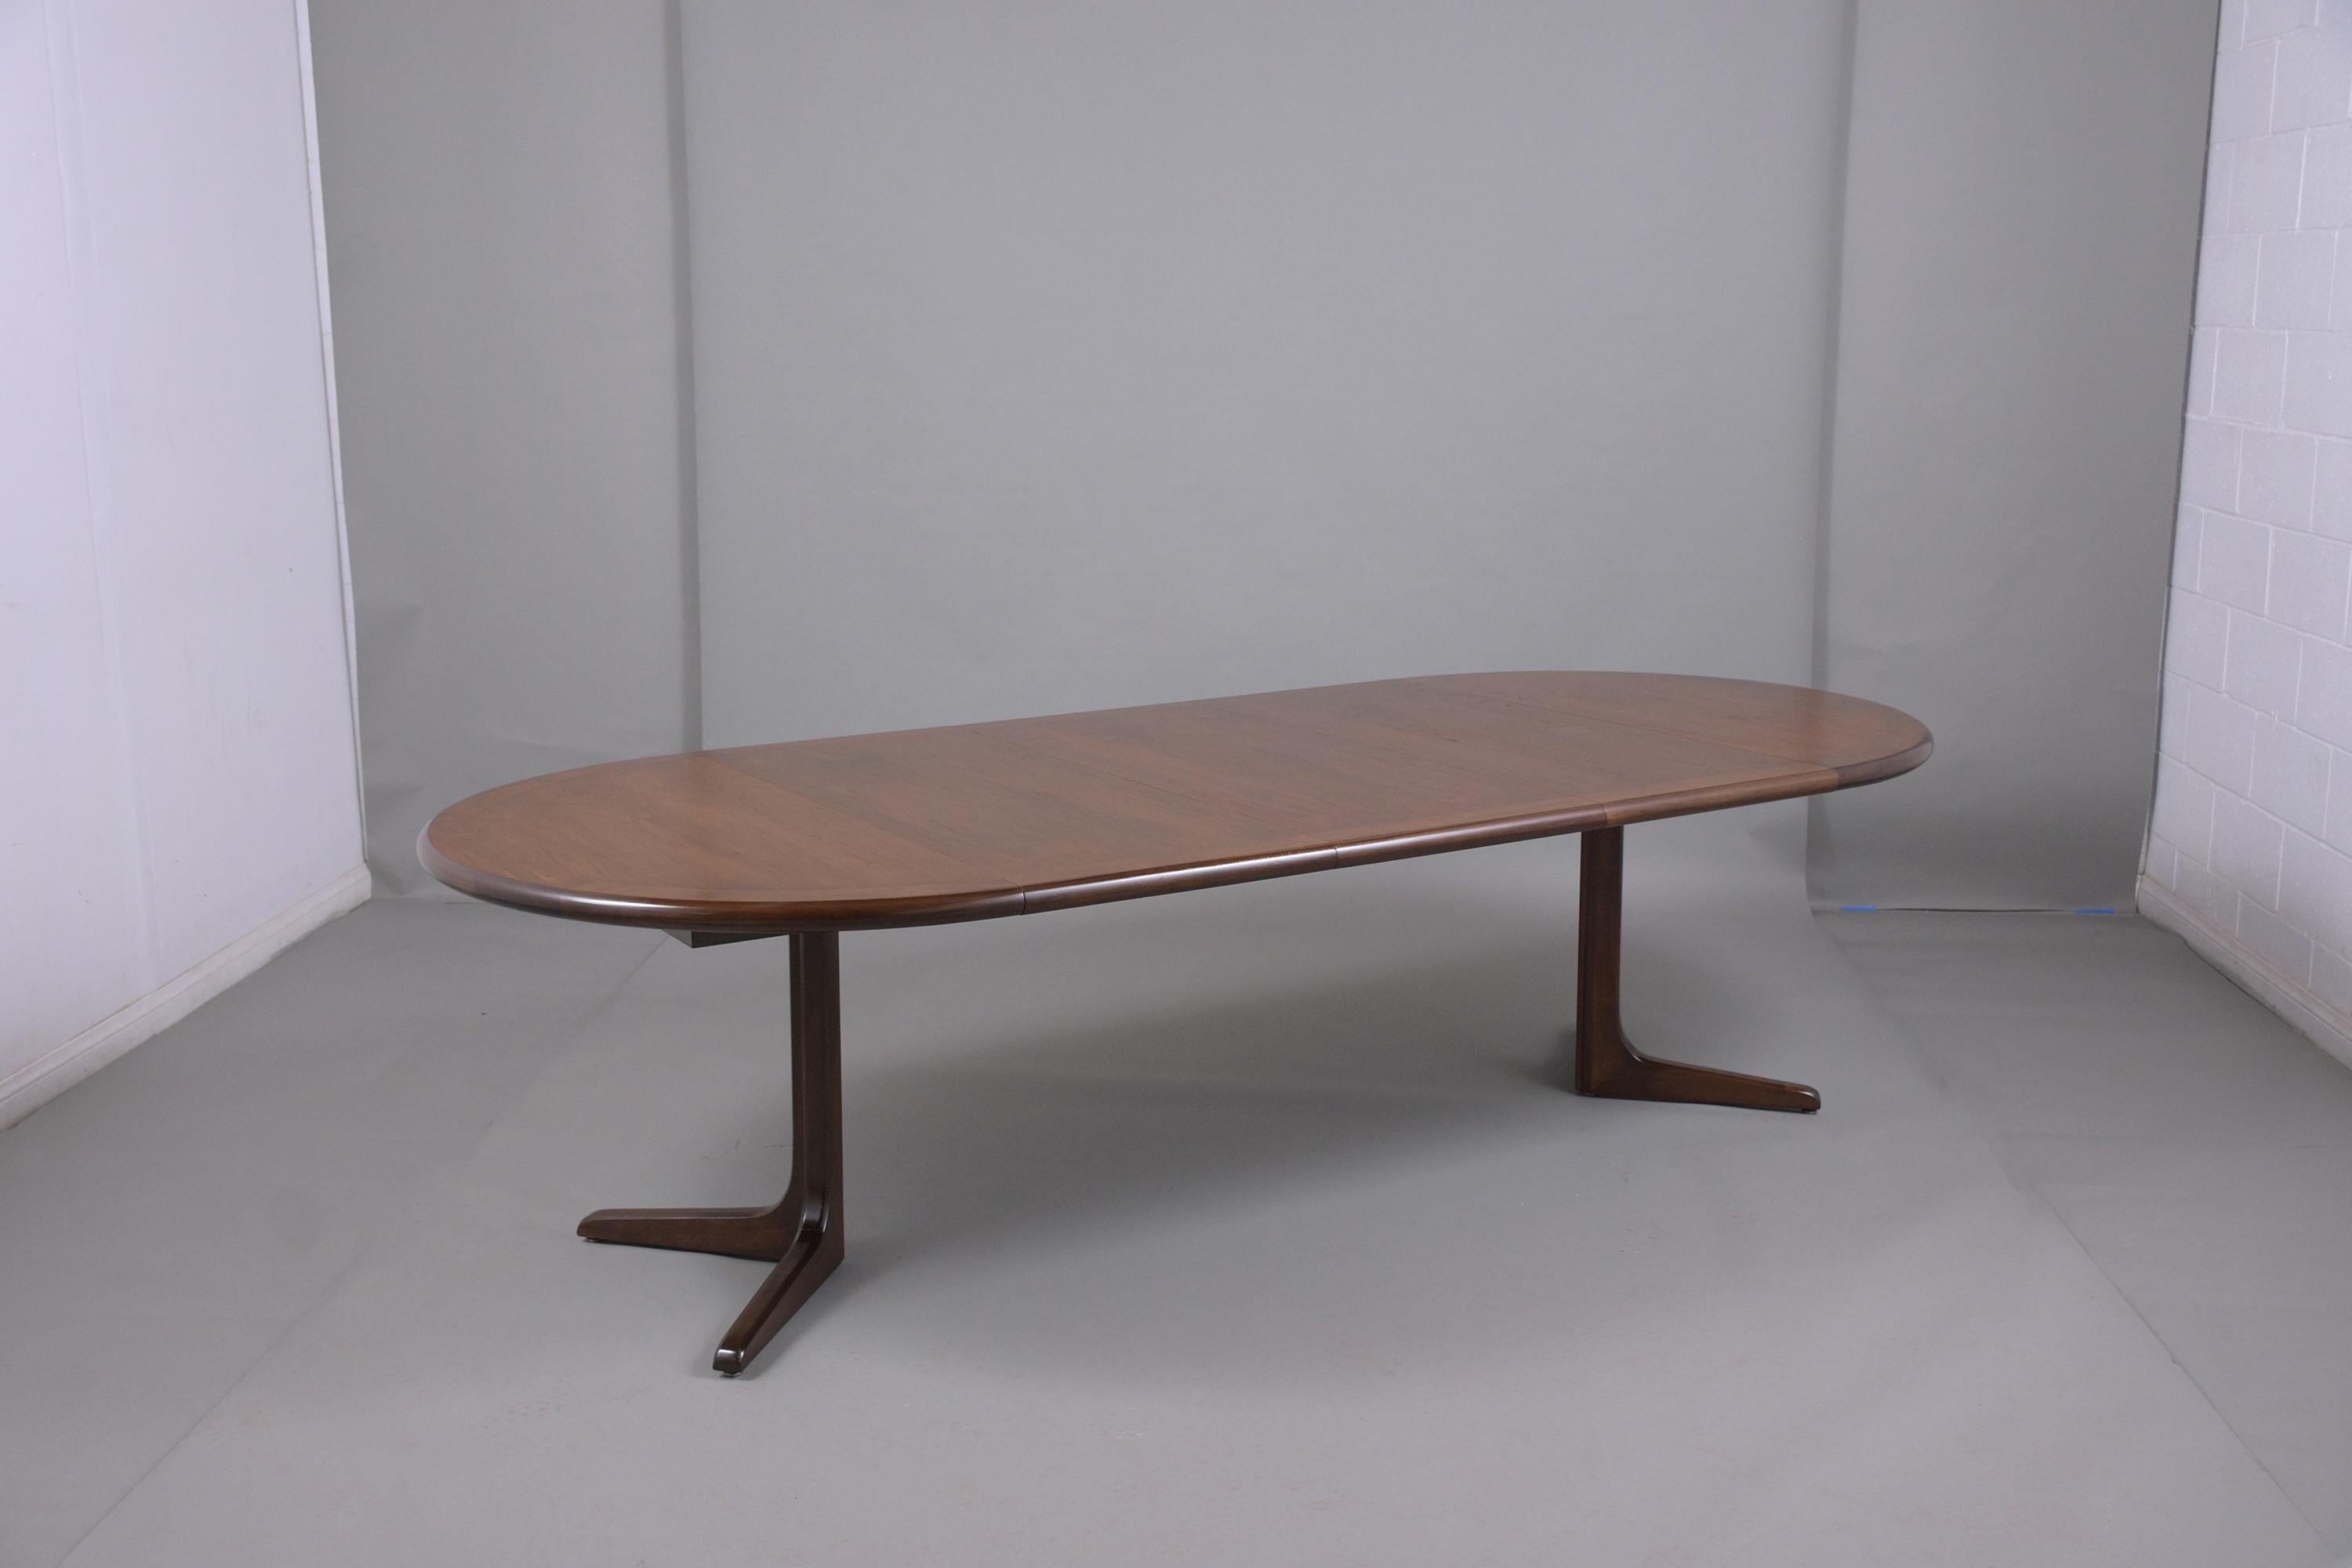 This Danish mid-century modern dining table has been newly restored, is made out of teak wood, and has its natural walnut stain finish with a newly lacquered finish. This circular top table comes with three extra leaves that can be added/ removed